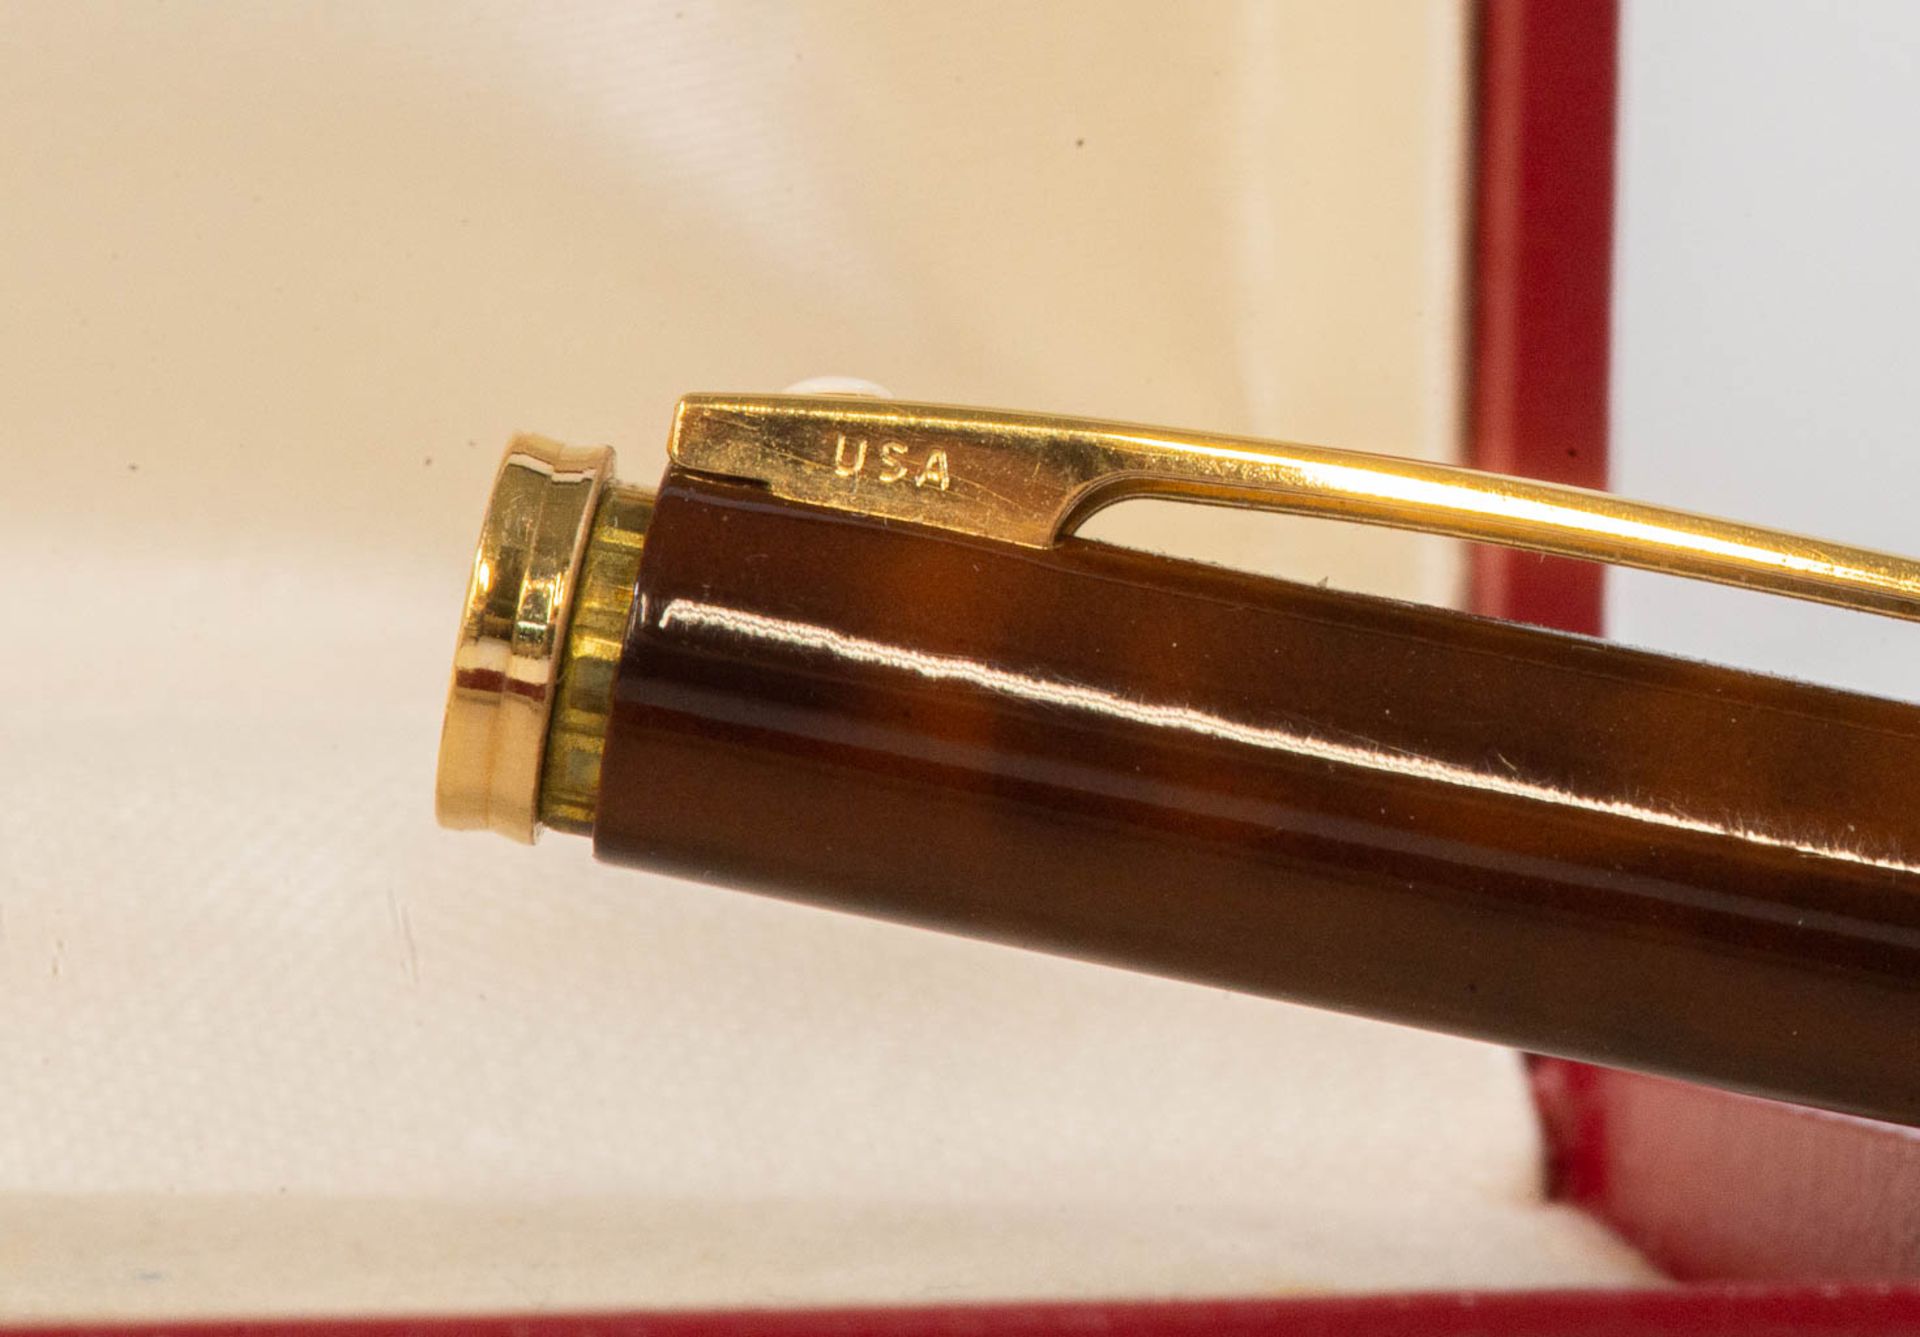 A Sheaffer fountain pen with 18kg gold nib, and a ballpoint pen in their original case. - Image 9 of 11